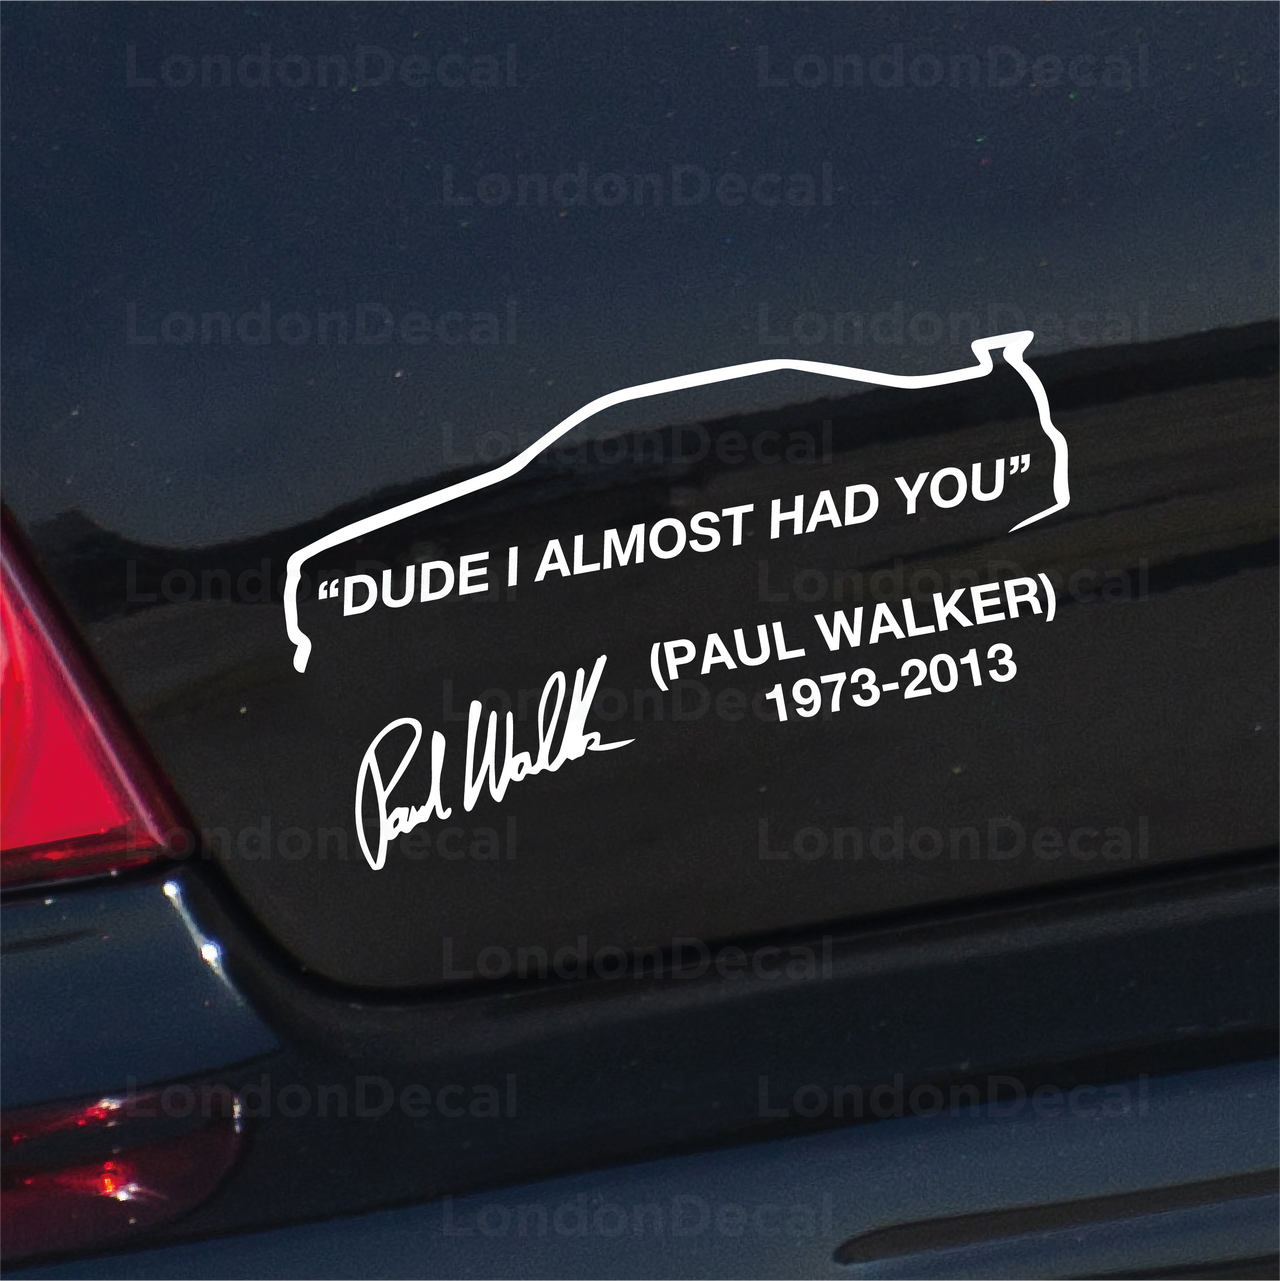 Paul Walker - Dude I Almost Had You Car Decal